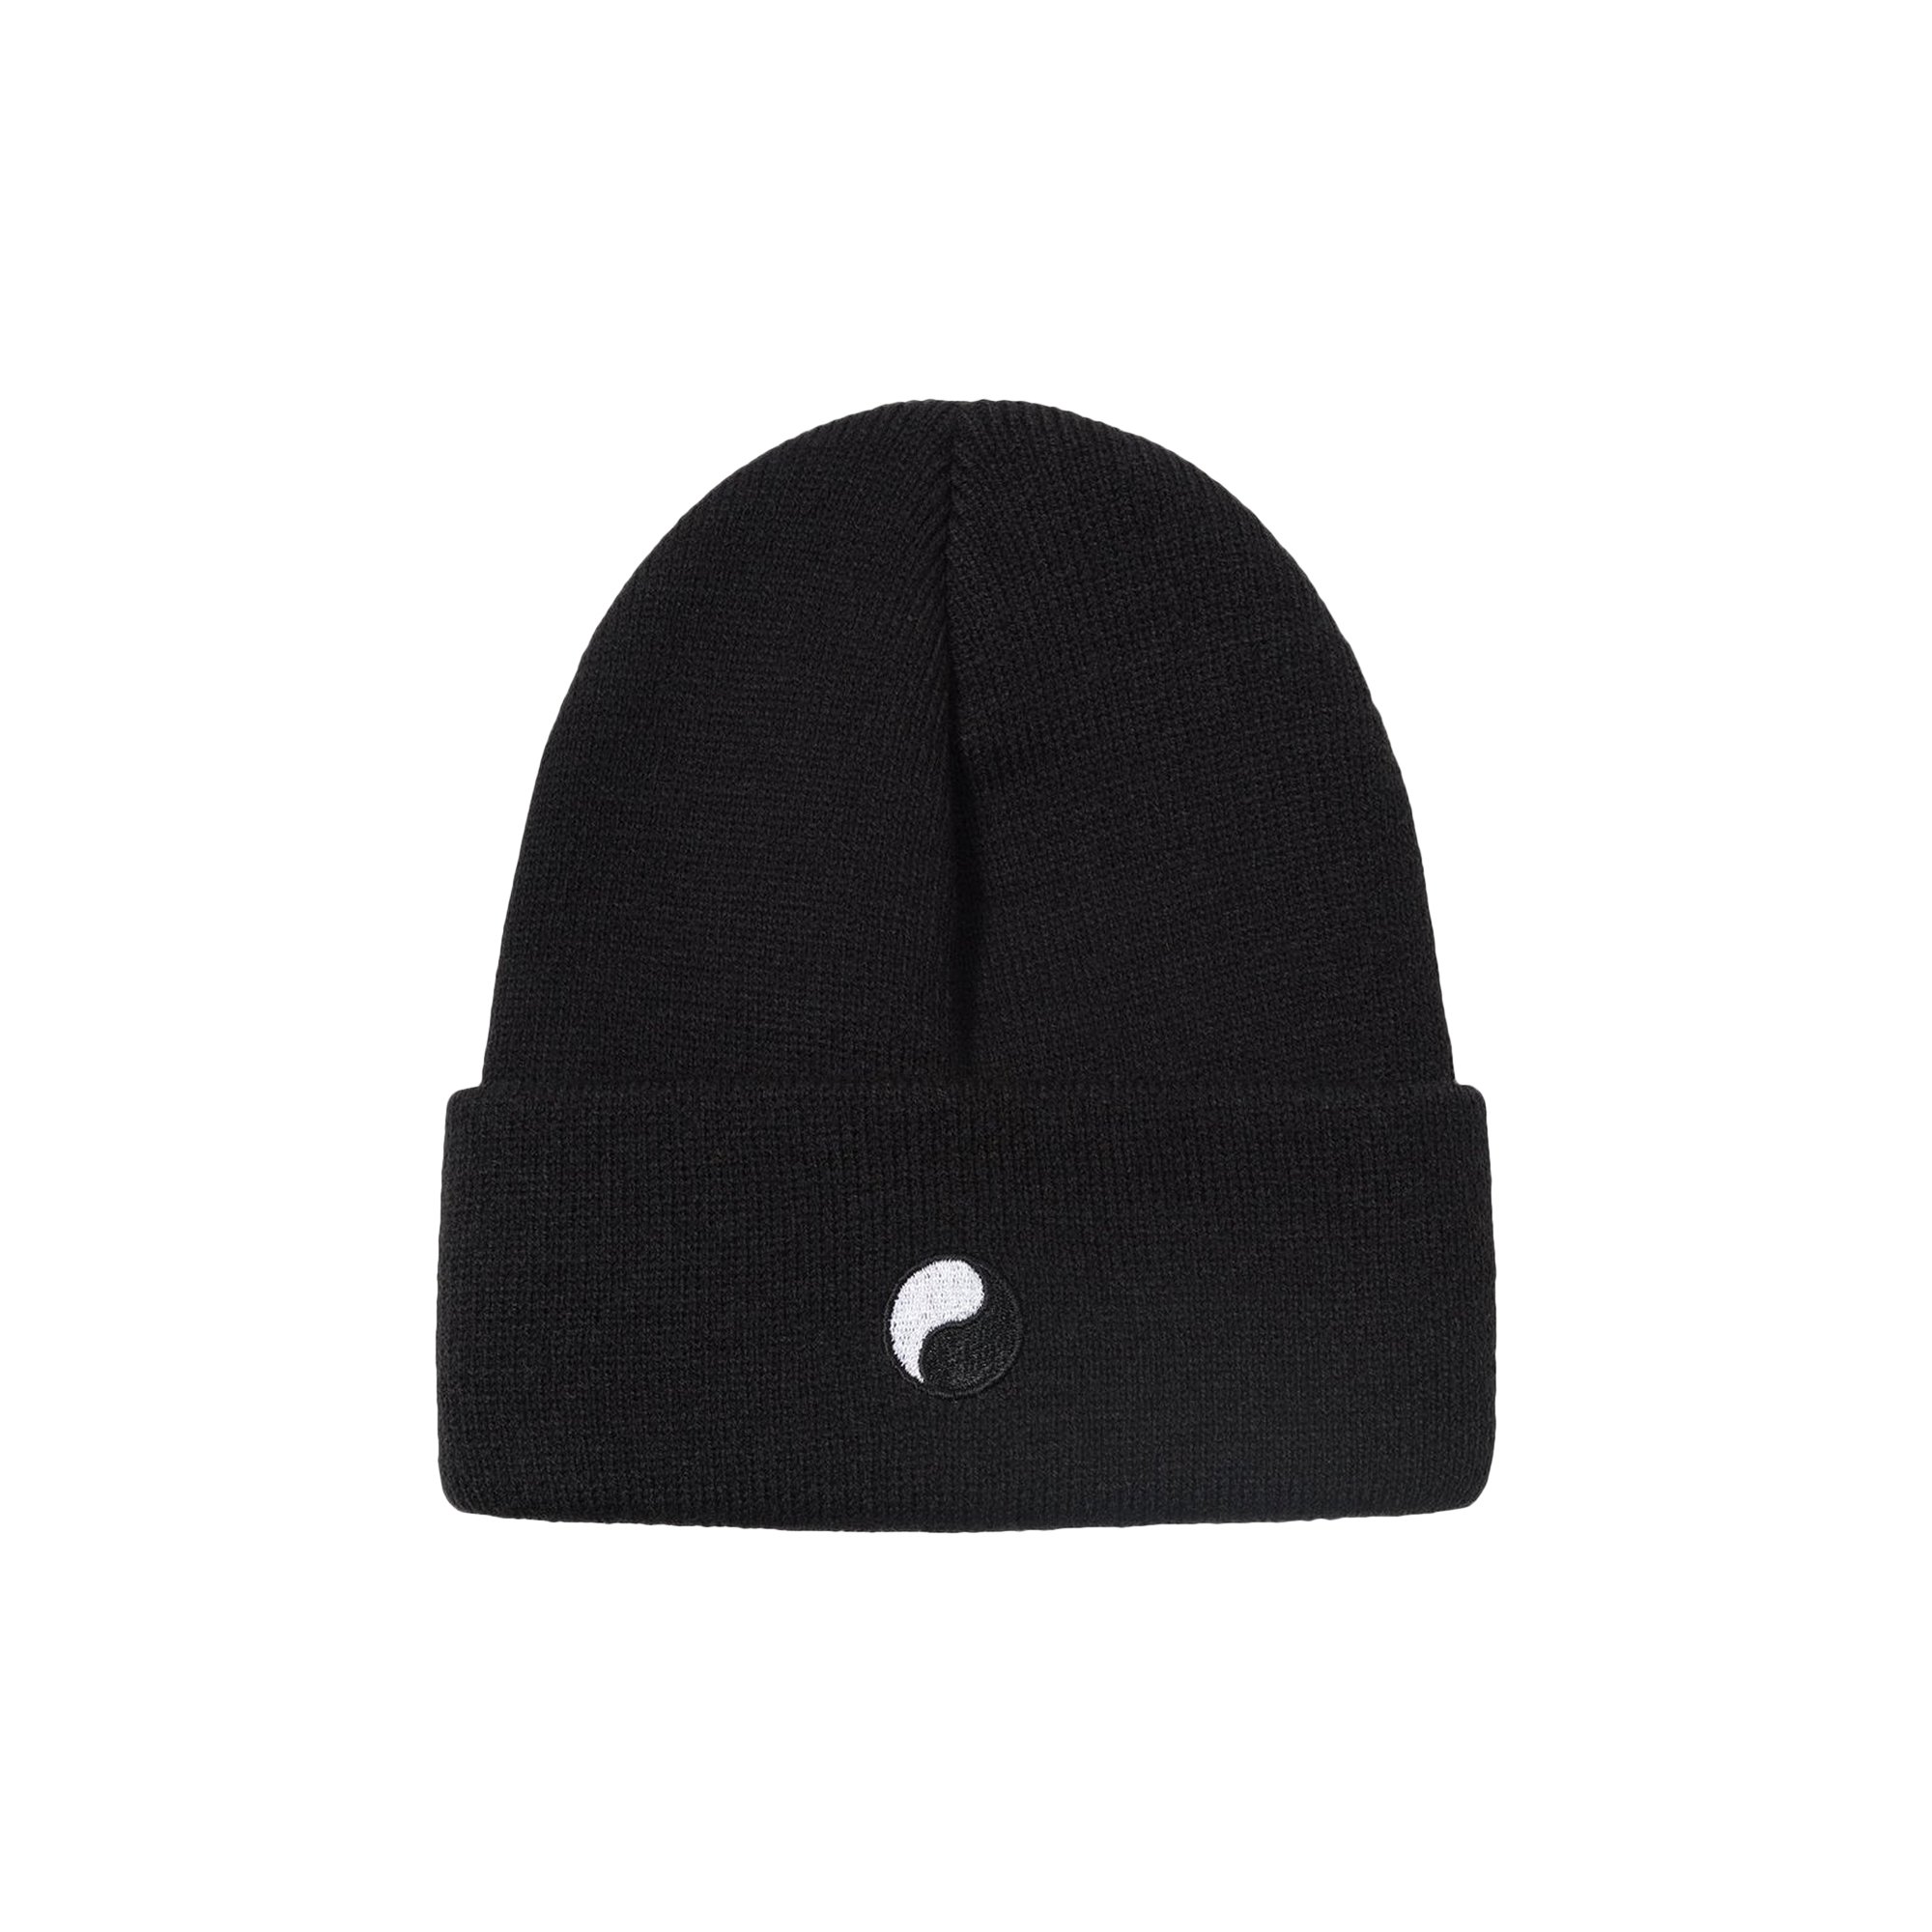 Buy Stussy x Our Legacy Recycled Cotton Beanie 'Black' - 332107 